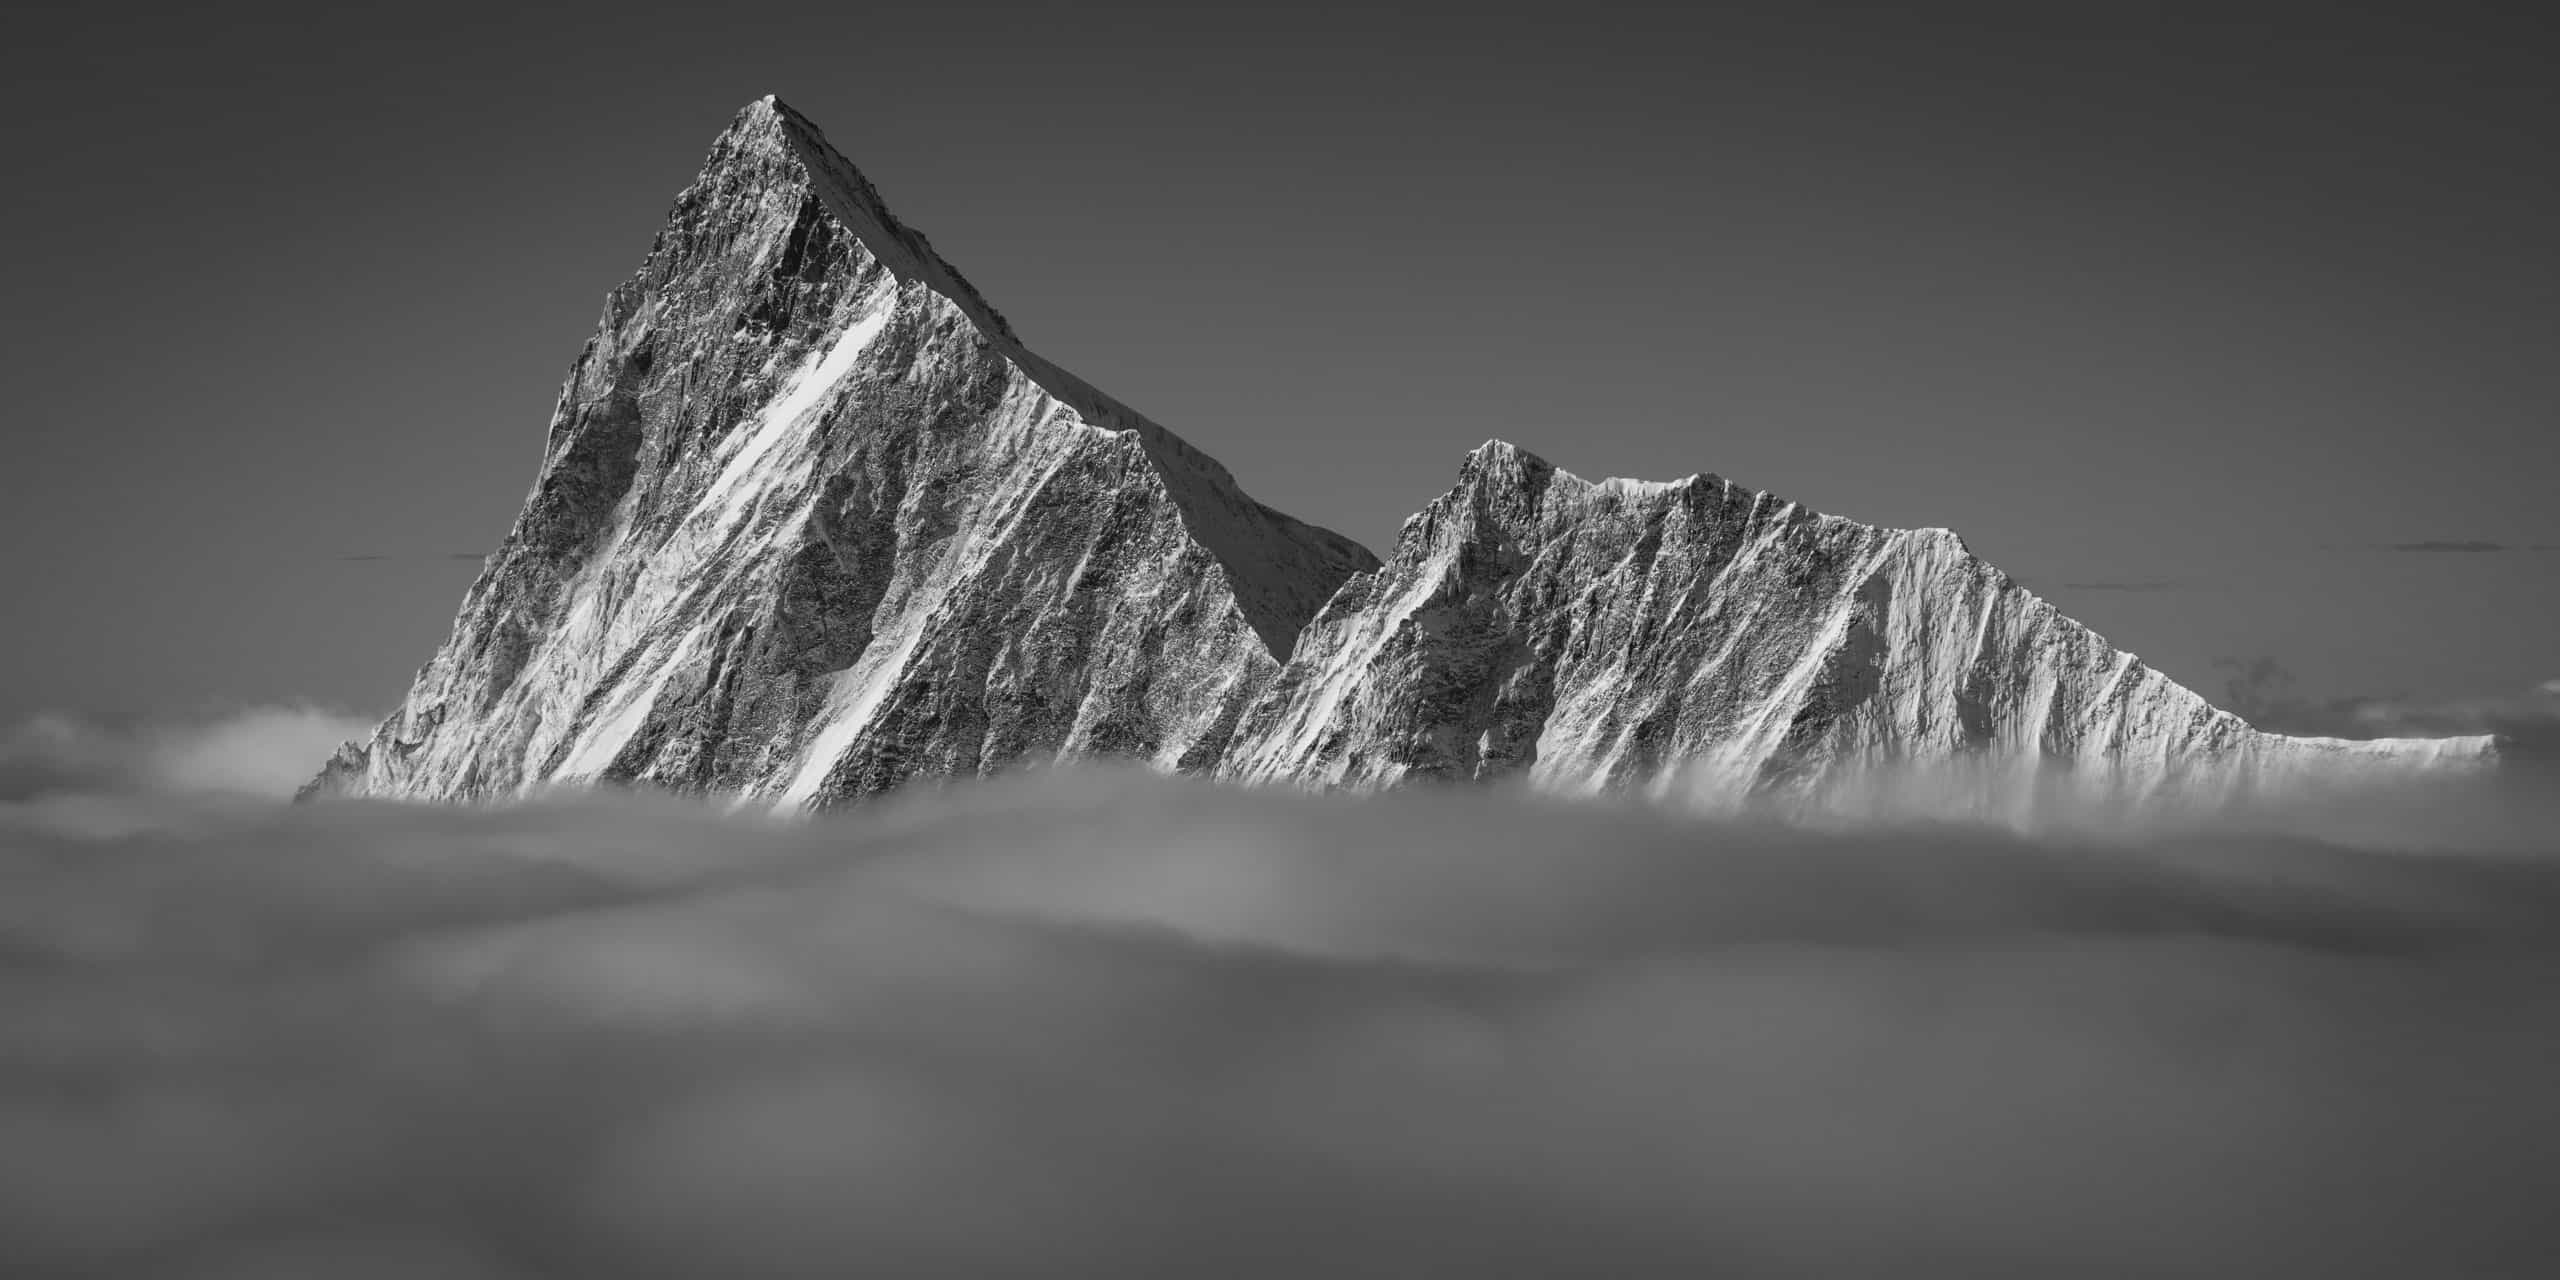 Panoramic photo of the Finsteraarhorn and the Agassizhorn. The summit of the Finsteraarhorn emerges from the sea of clouds after a period of snow.